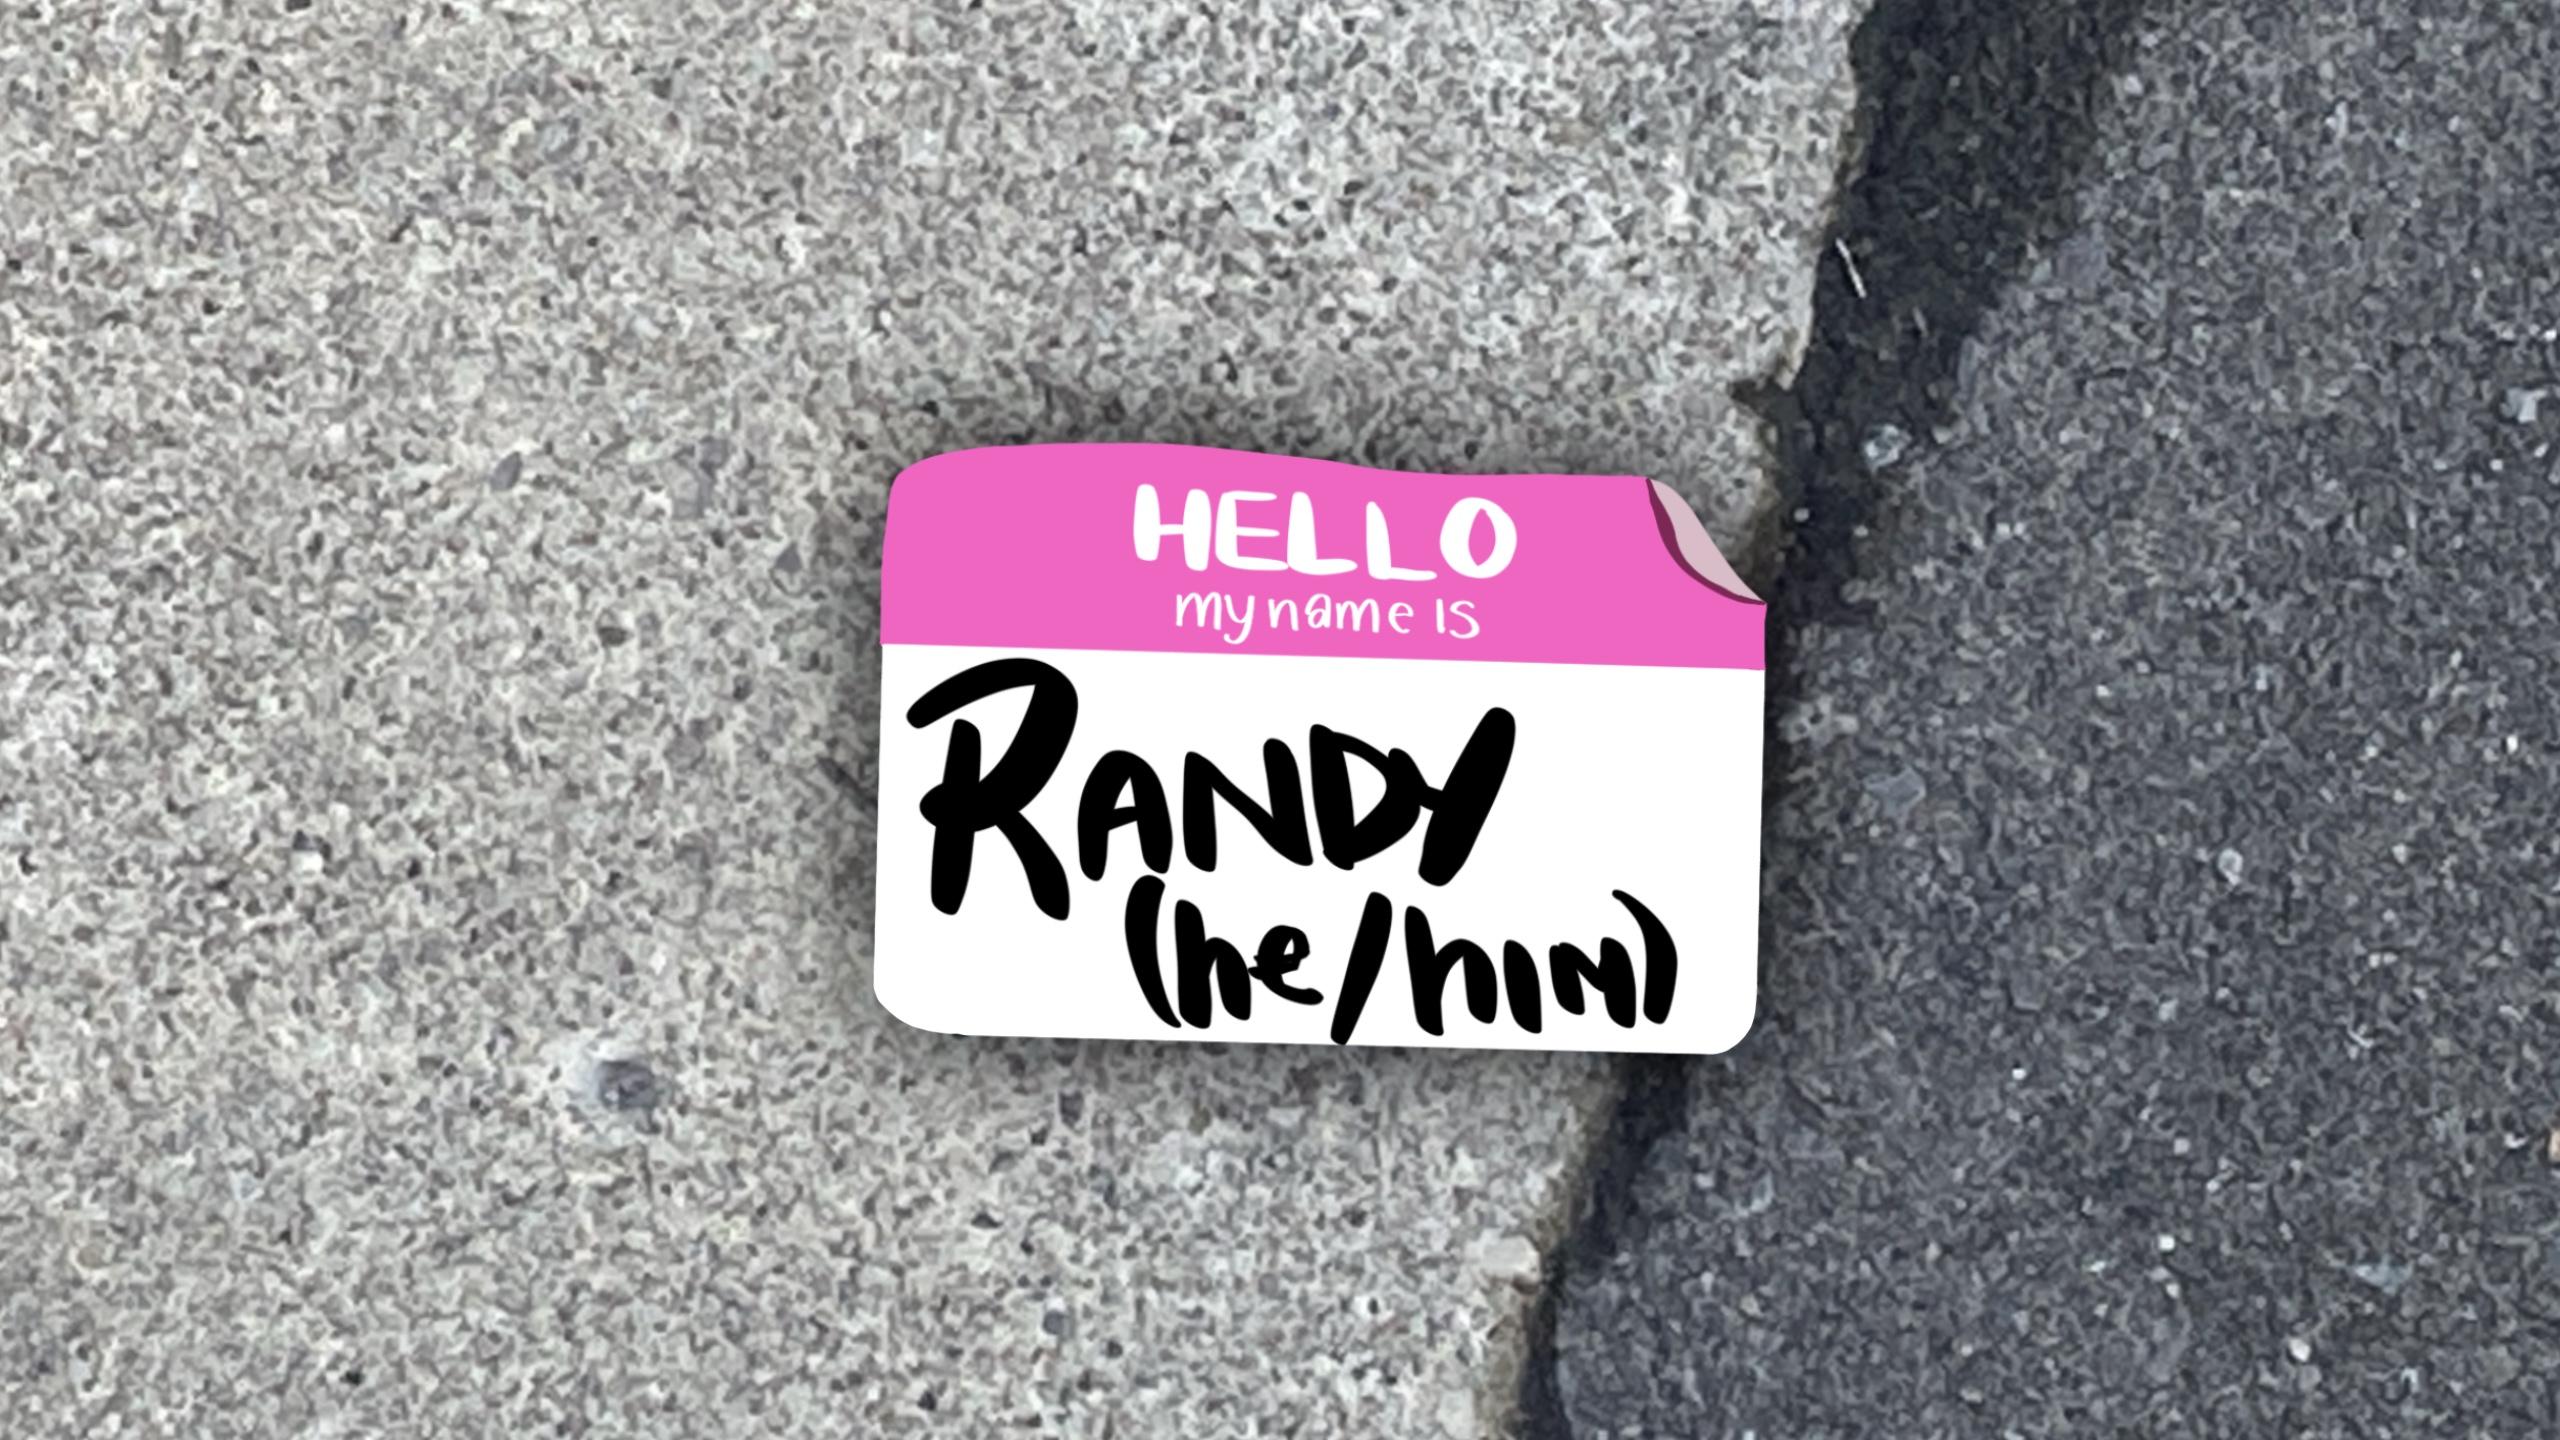 On pavement, an illustrated name tag saying "hello, my name is, randy he/him"